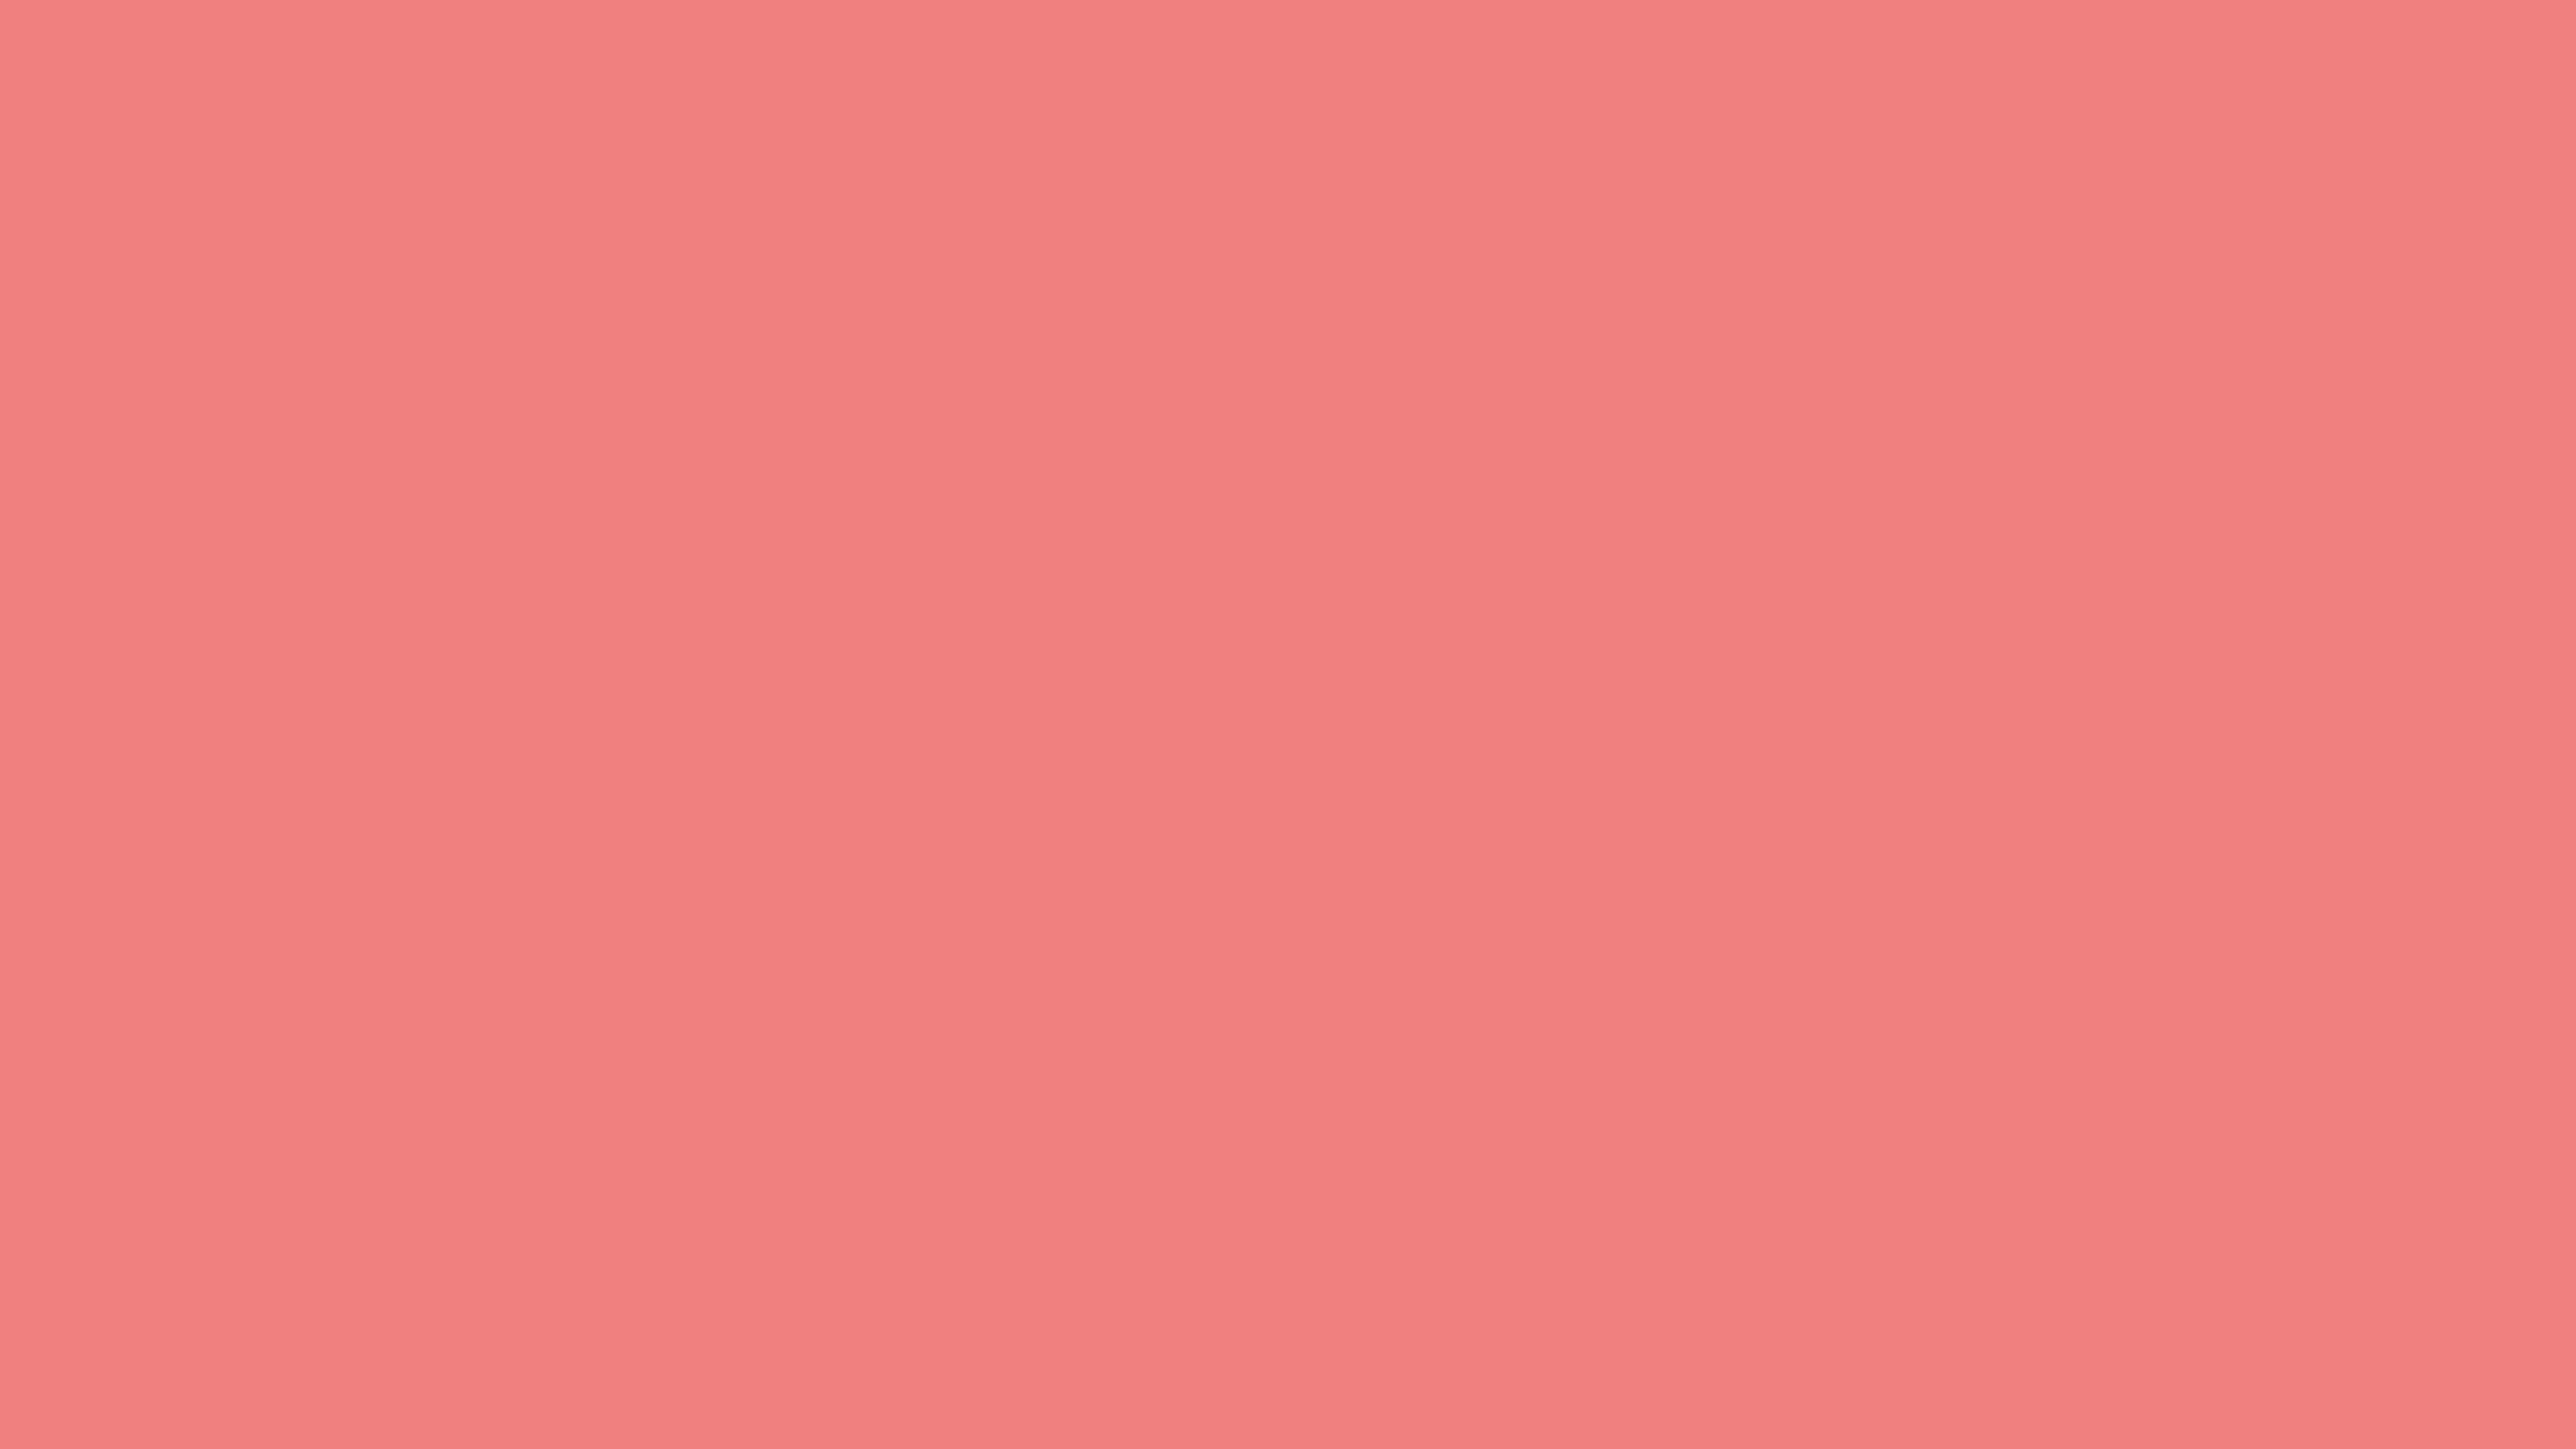 7680x4320 Light Coral Solid Color Background